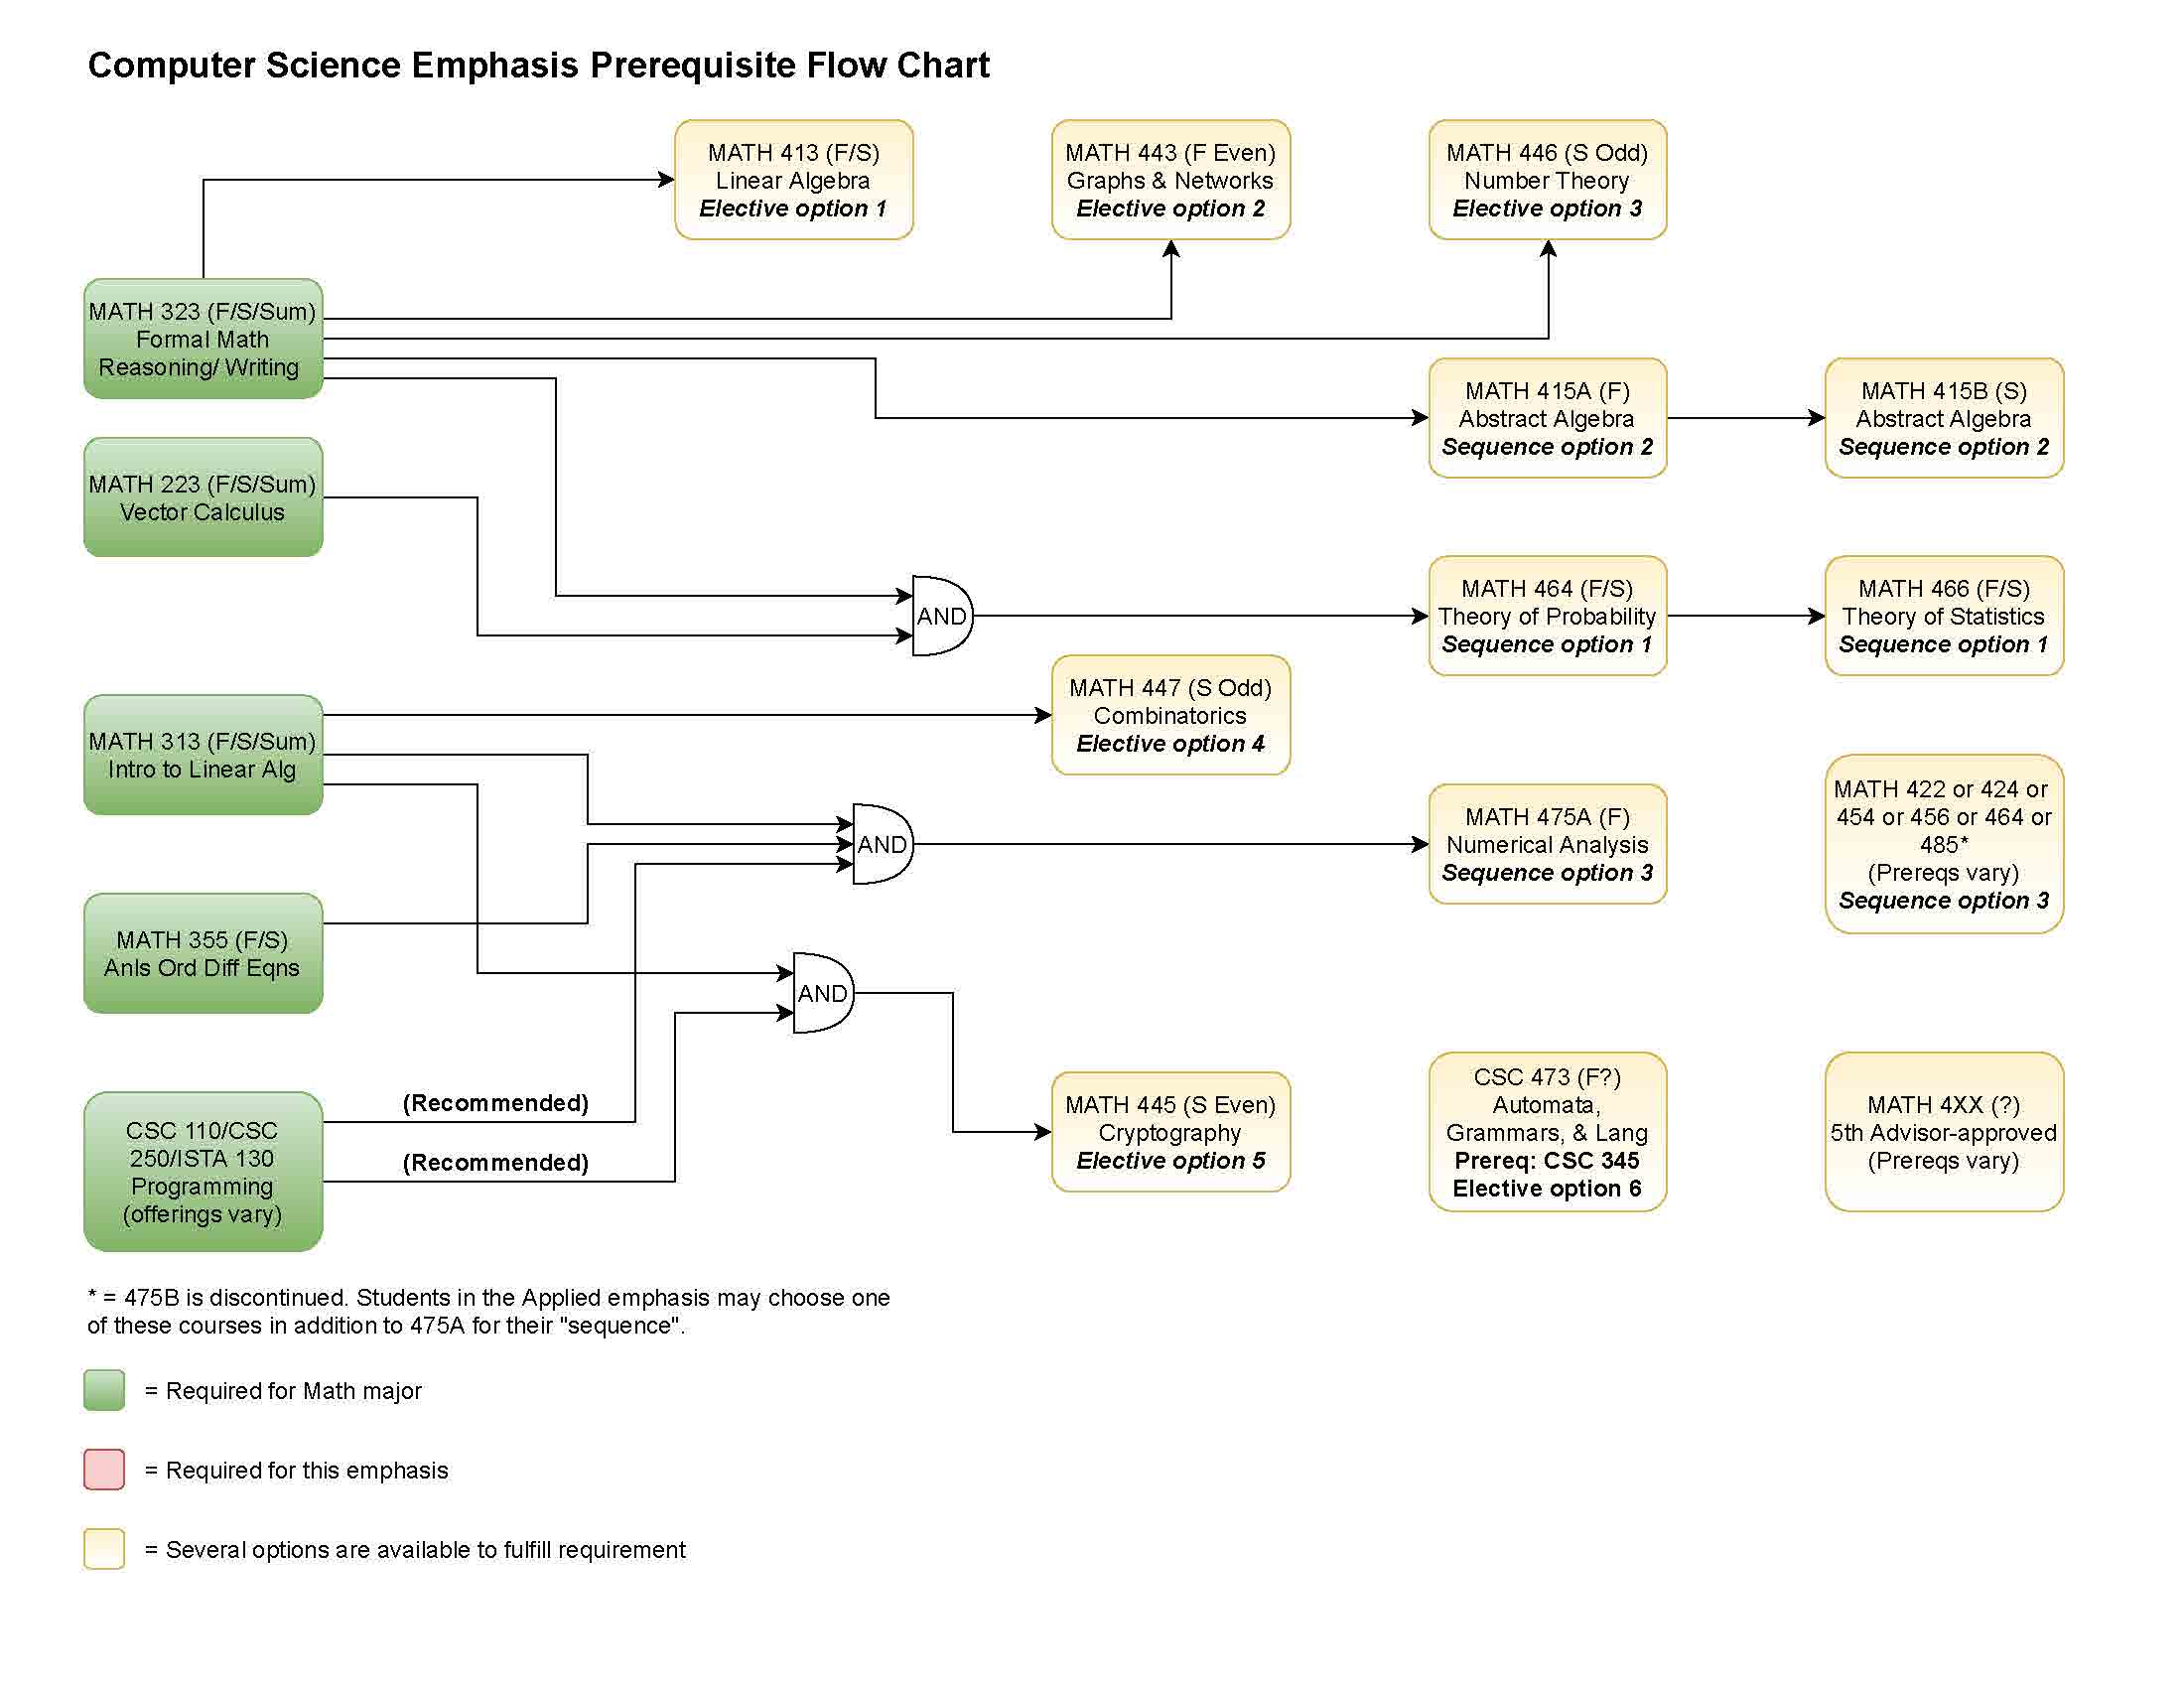 prerequisite flowchart for computer science emphasis (click image for downloadable PDF)